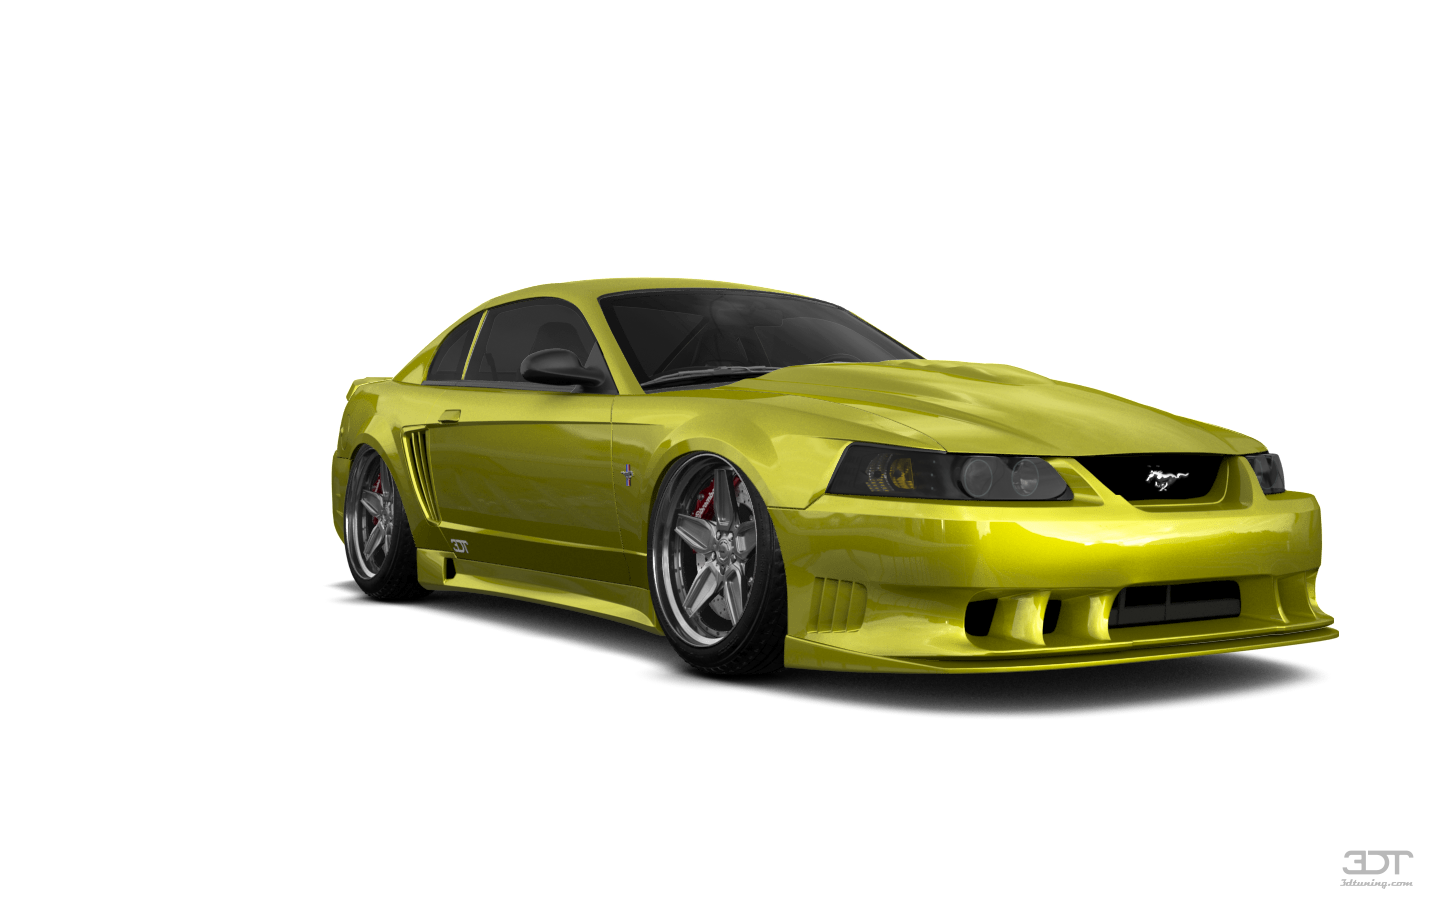 Ford Mustang 2 Door Coupe 2000